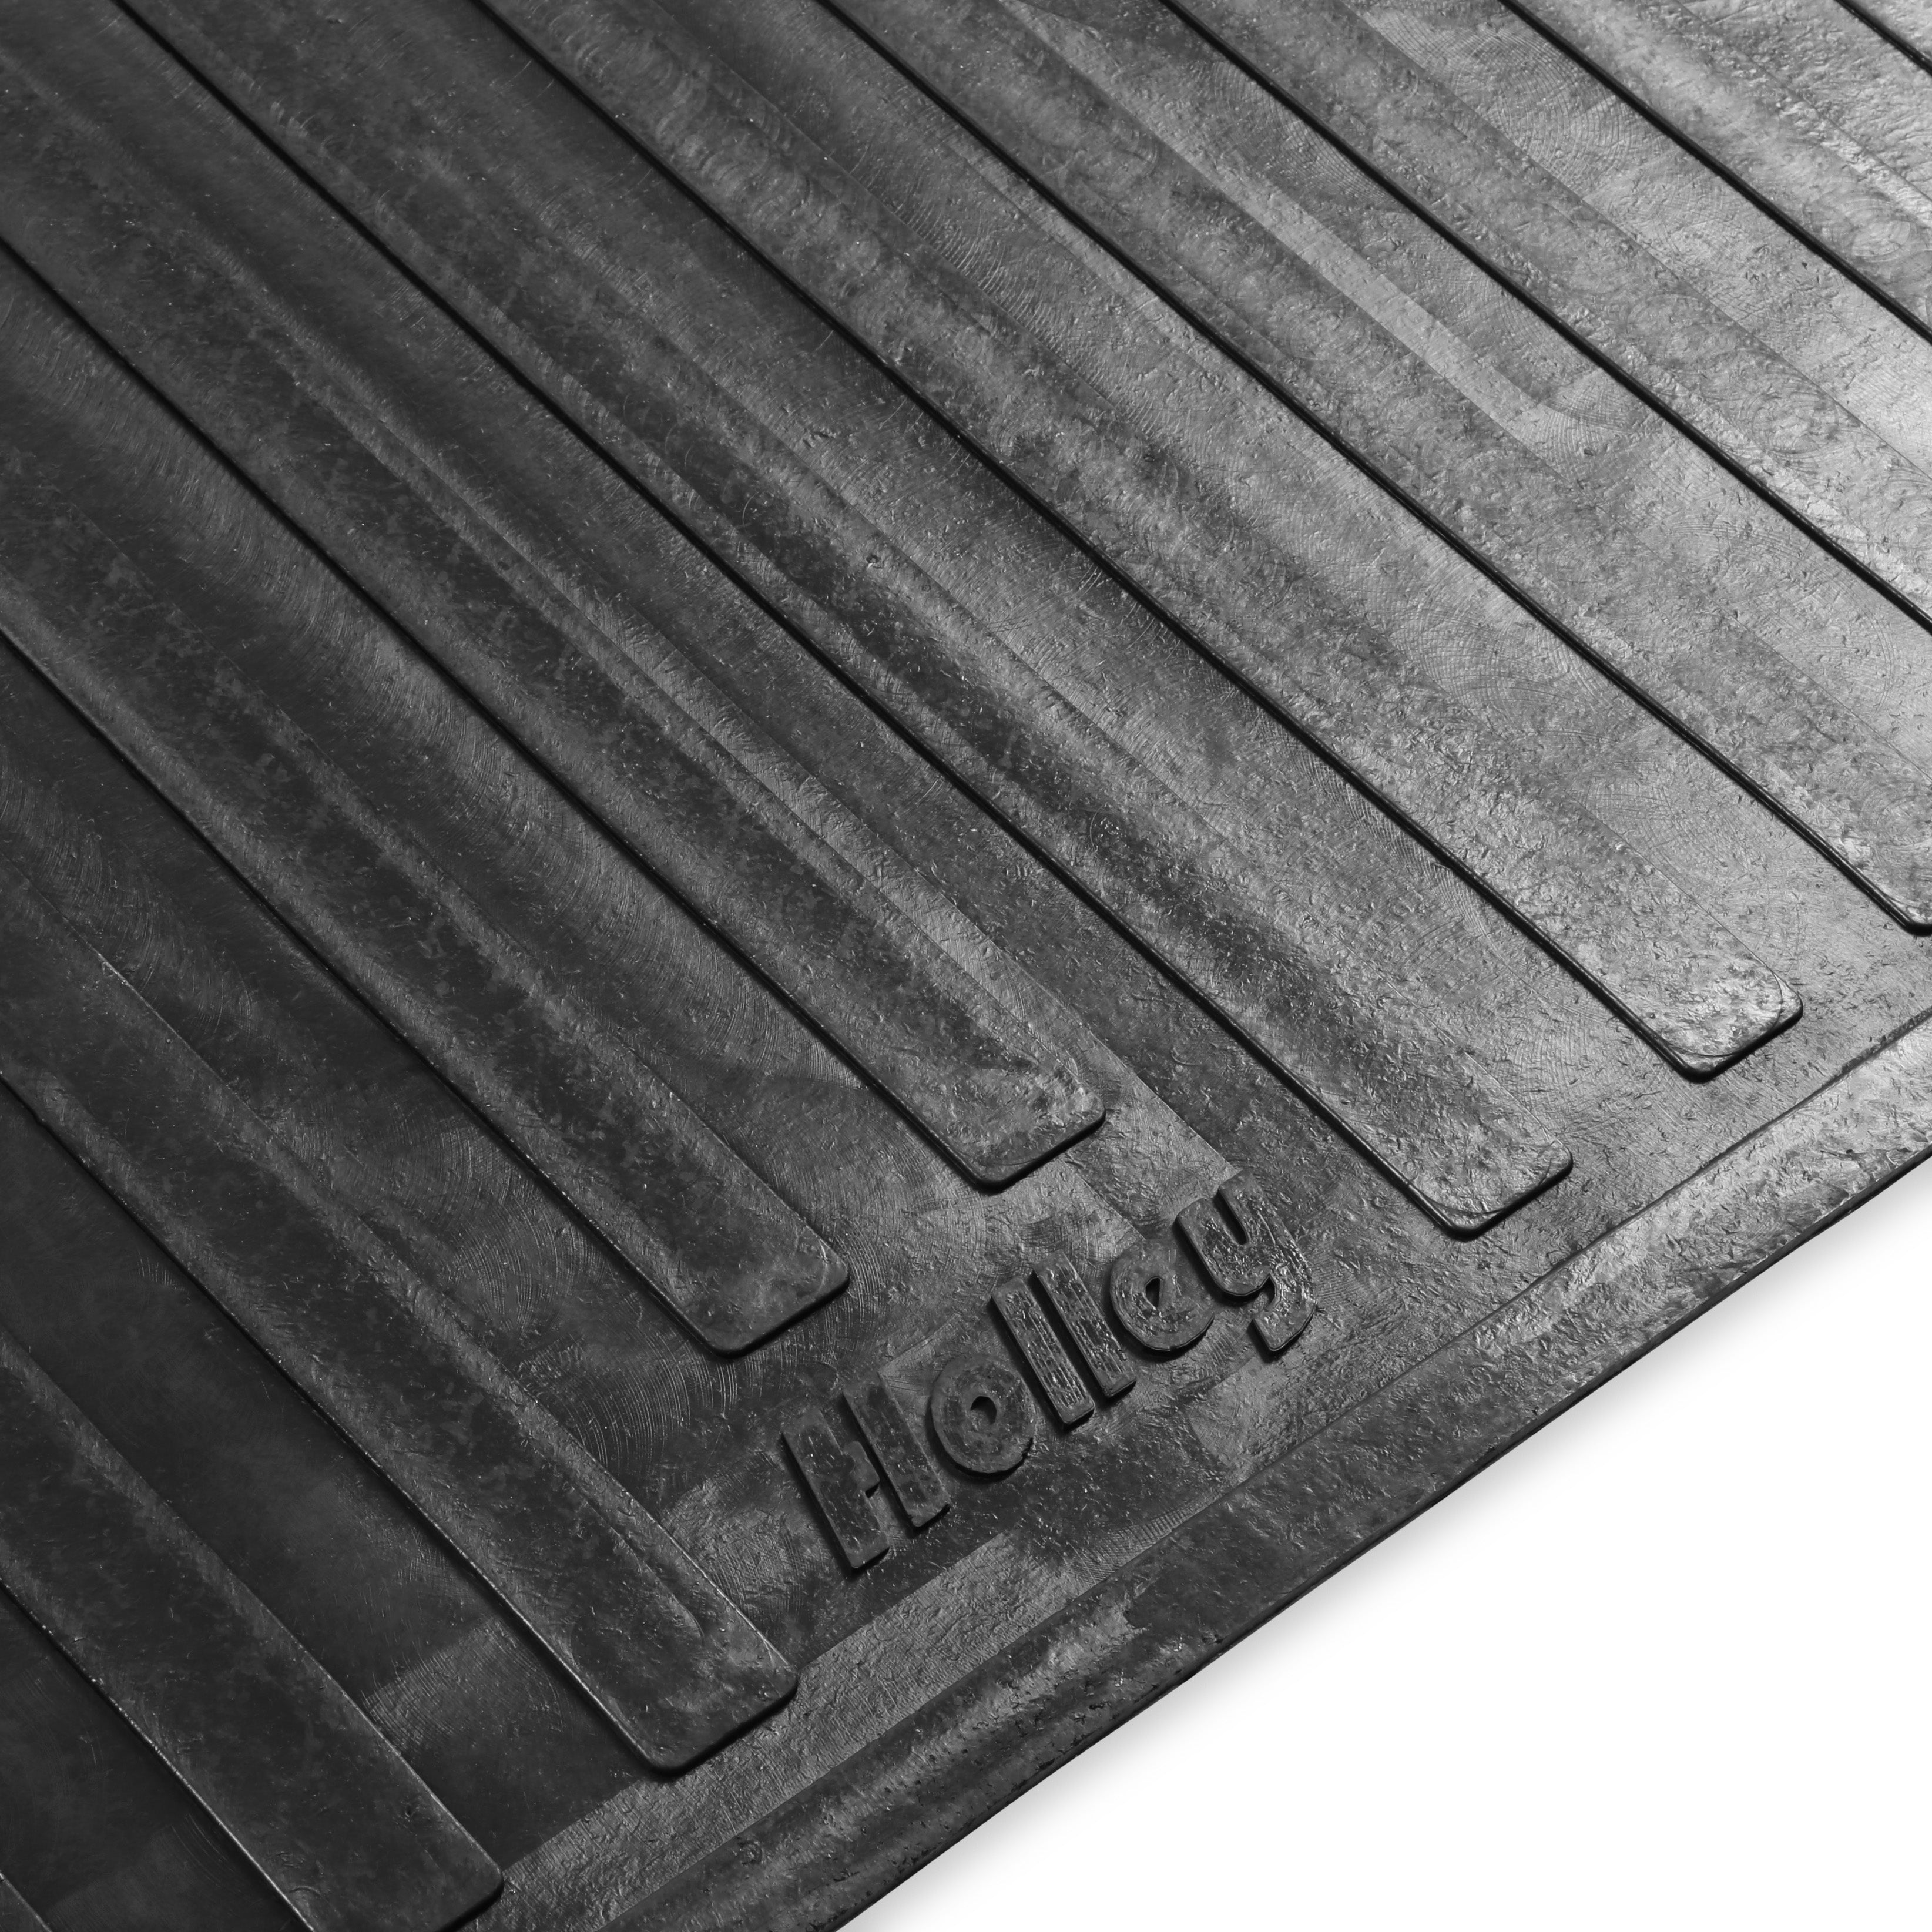 BROTHERS - TRUCK BED MAT pn 06-7387lbm